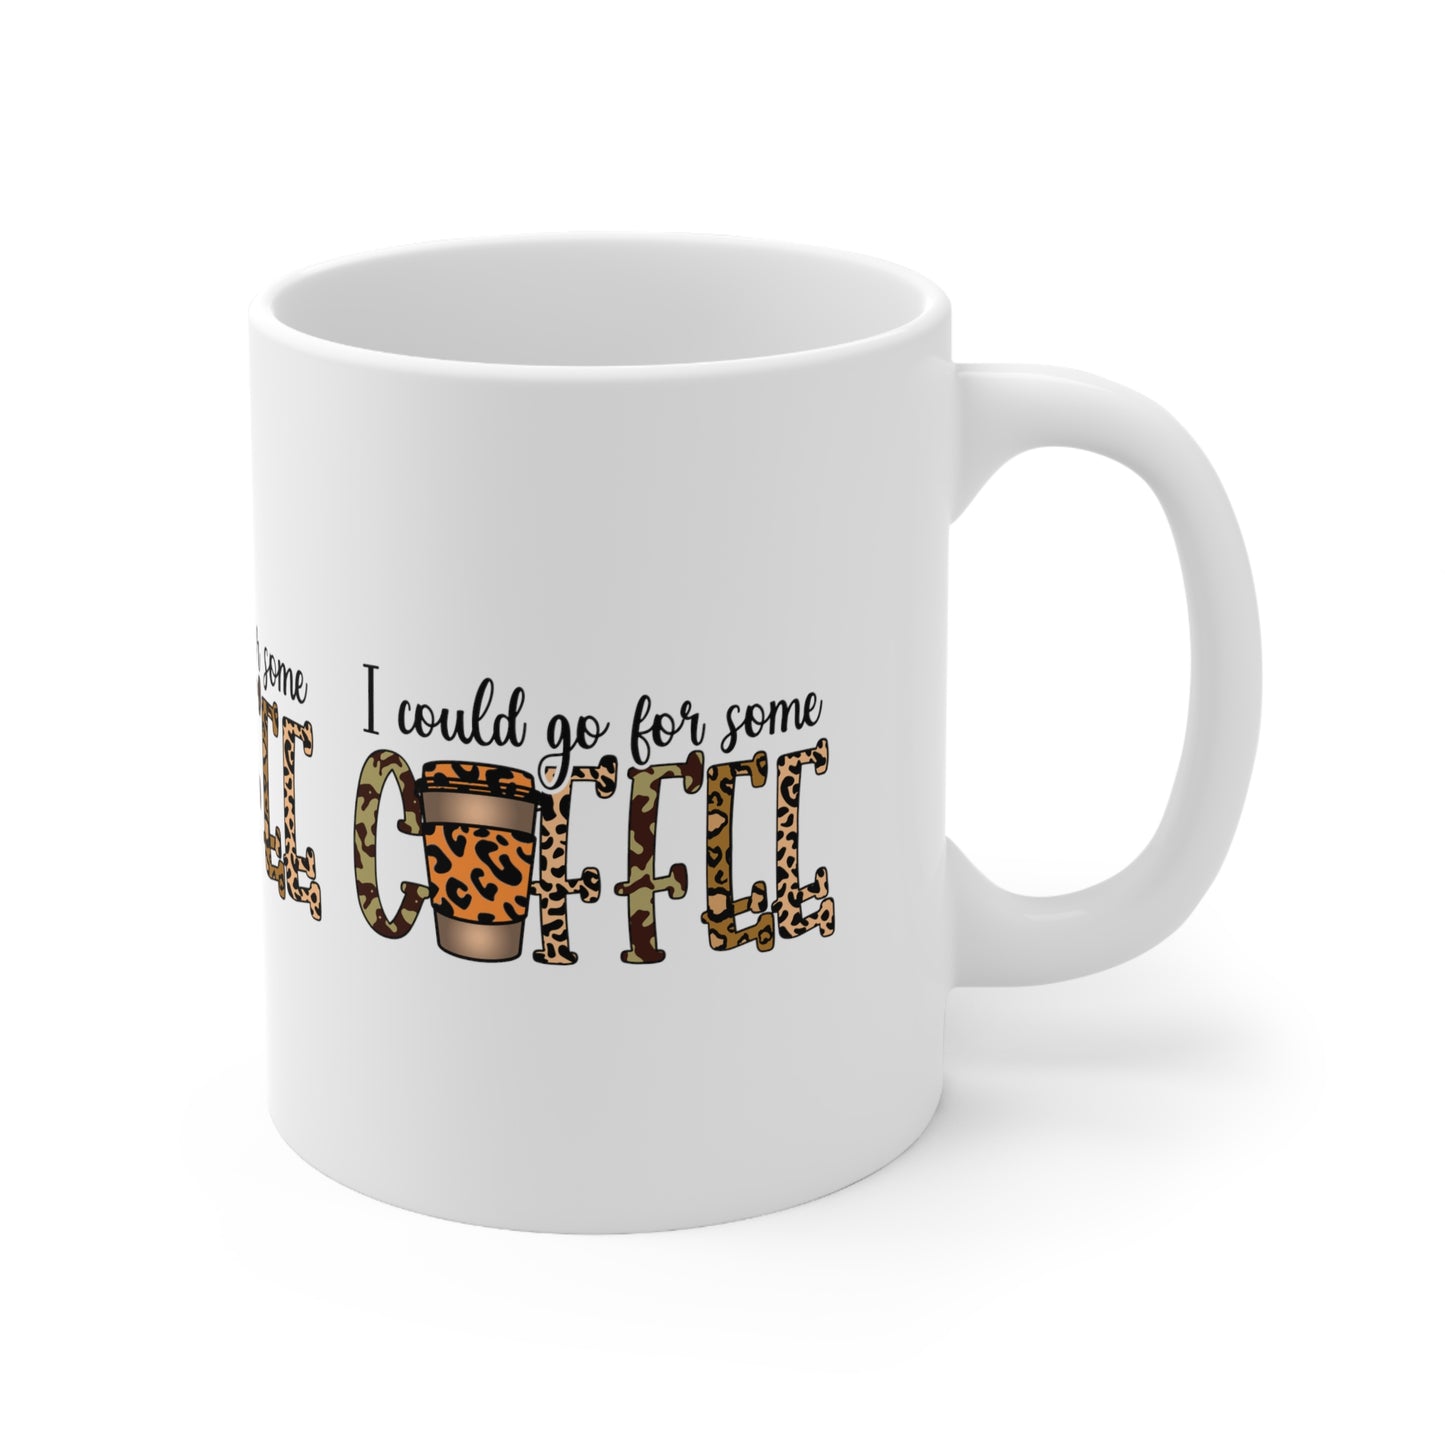 I COULD GO FOR SOME COFFEE Coffee Lovers Mug - MUGSCITY - Free Shipping